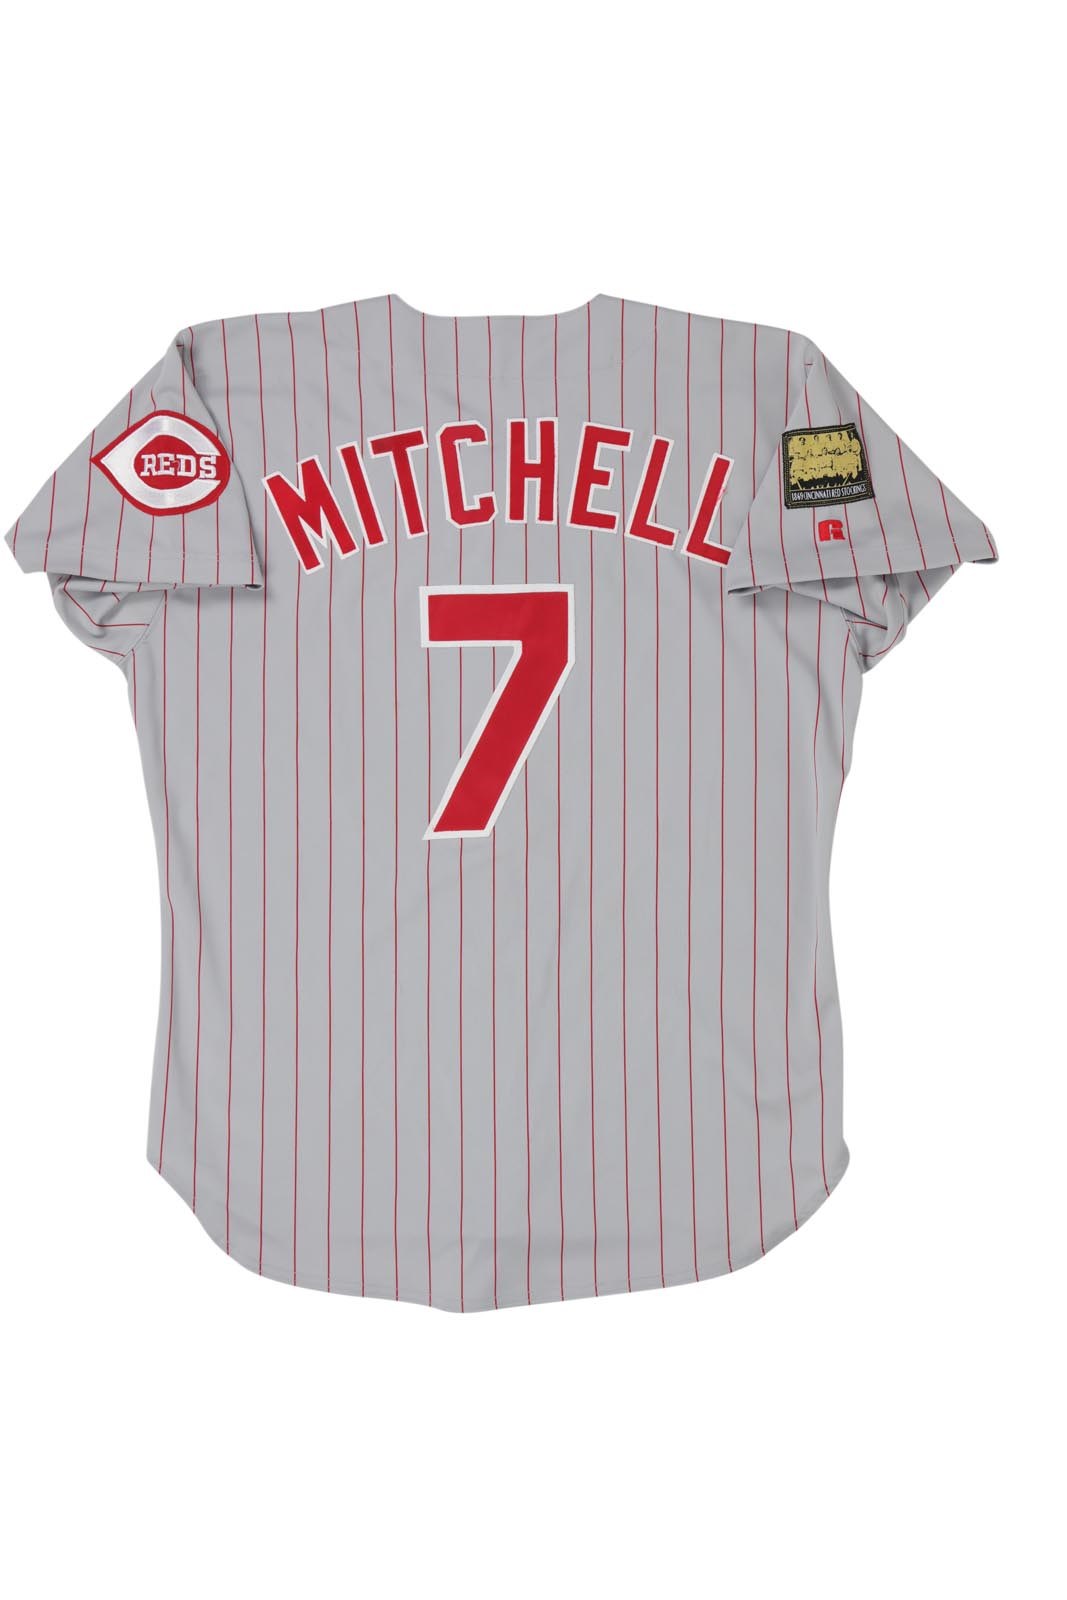 - 1994 Kevin Mitchell Cincinnati Reds Game Worn Jersey with 1869 Patch (Bernie Stowe Collection)